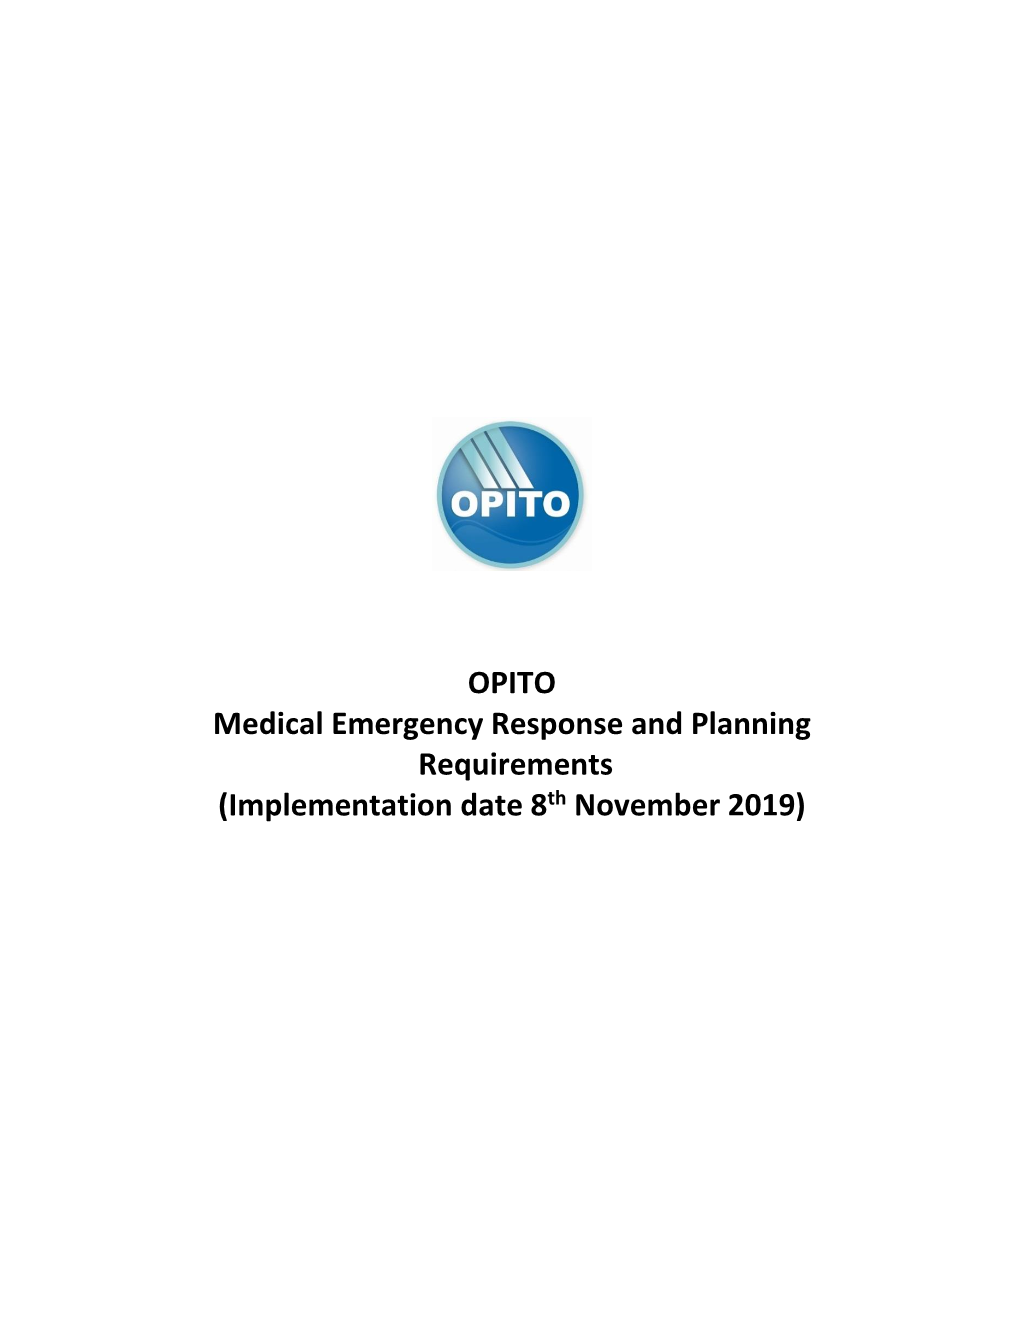 OPITO Medical Emergency Response and Planning Requirements (Implementation Date 8Th November 2019)